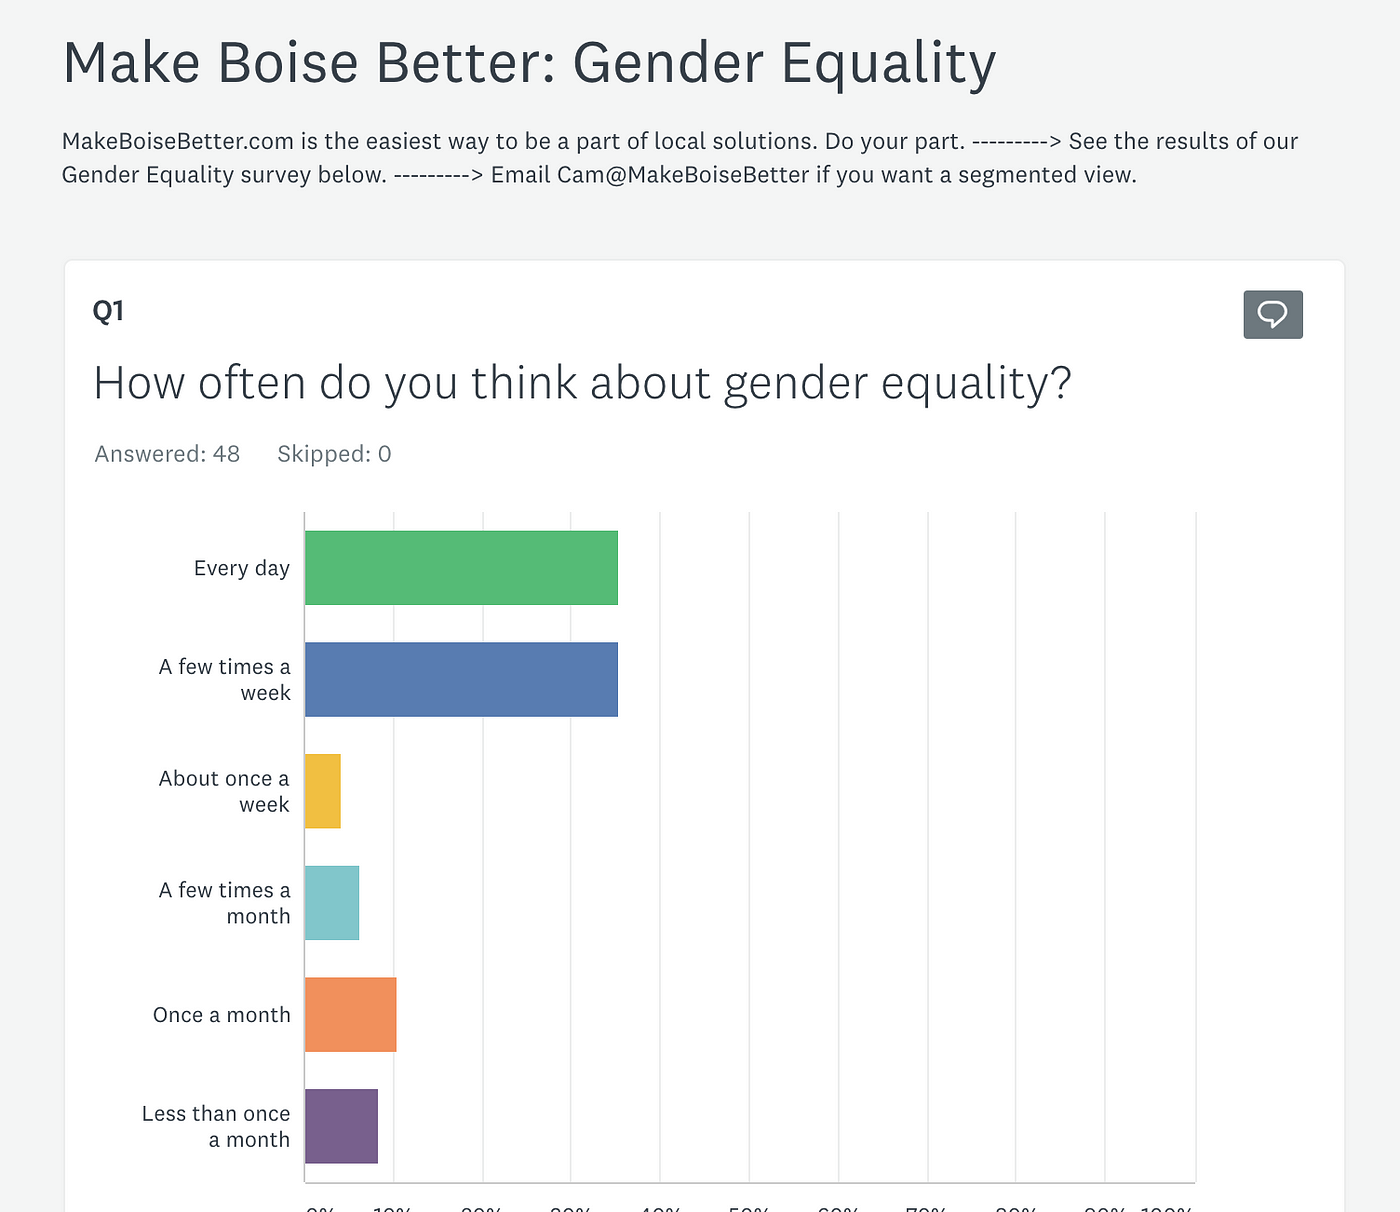 Gender Equality Survey. Questions, results, analysis | by Cam Crow | Make  Idaho Better | Medium